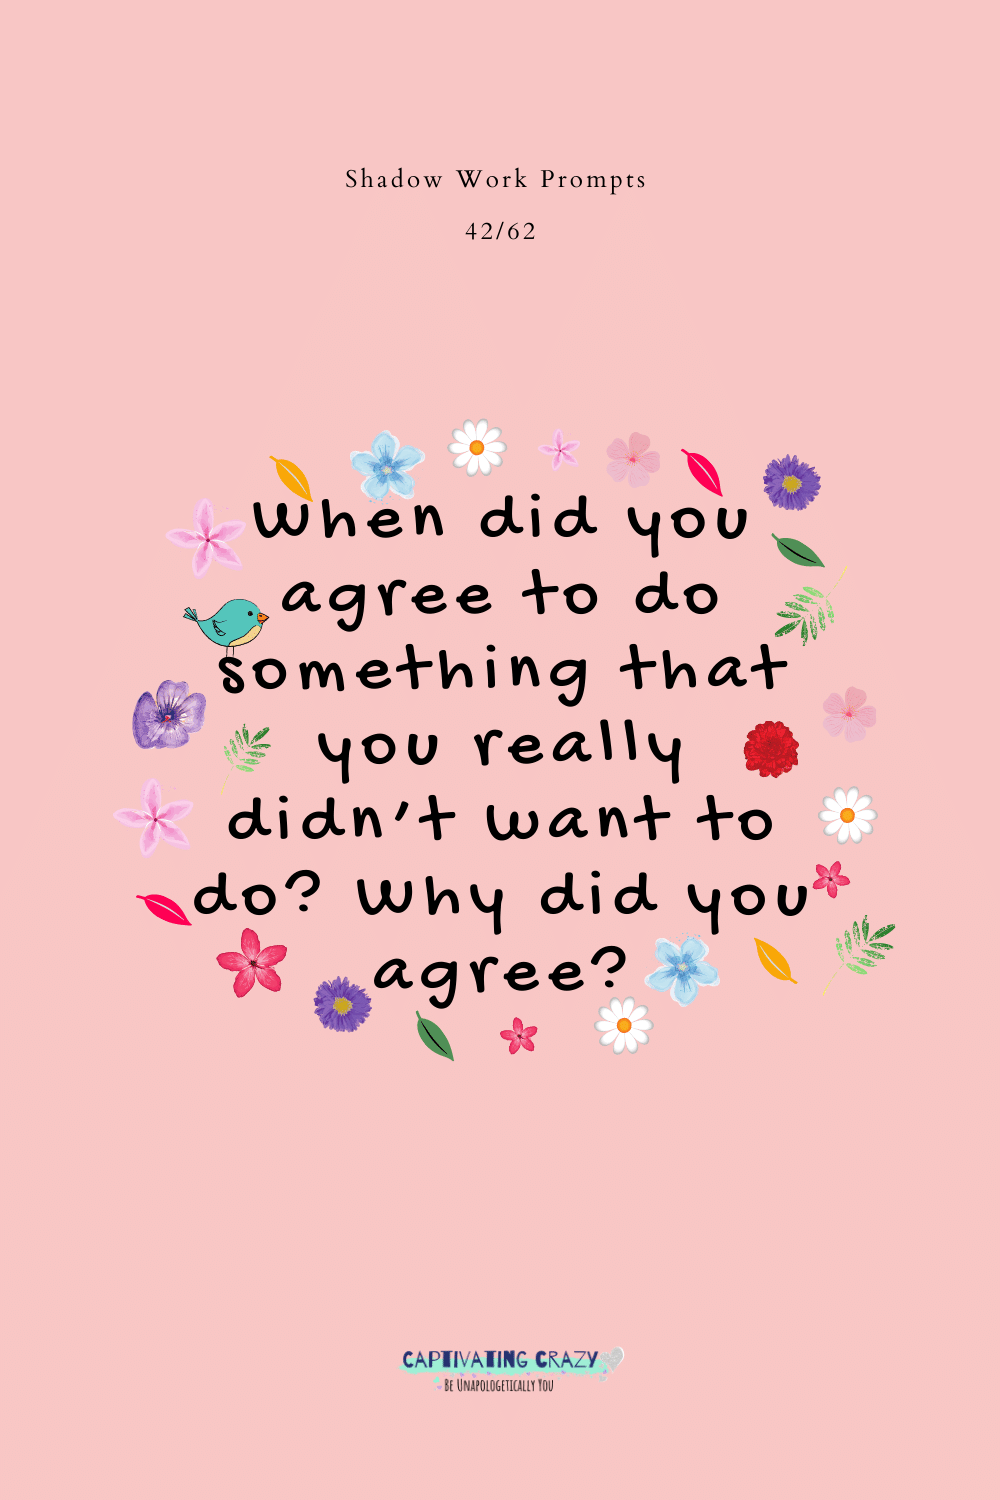 When did you agree to do something that you really didn't want to do? Why did you agree?